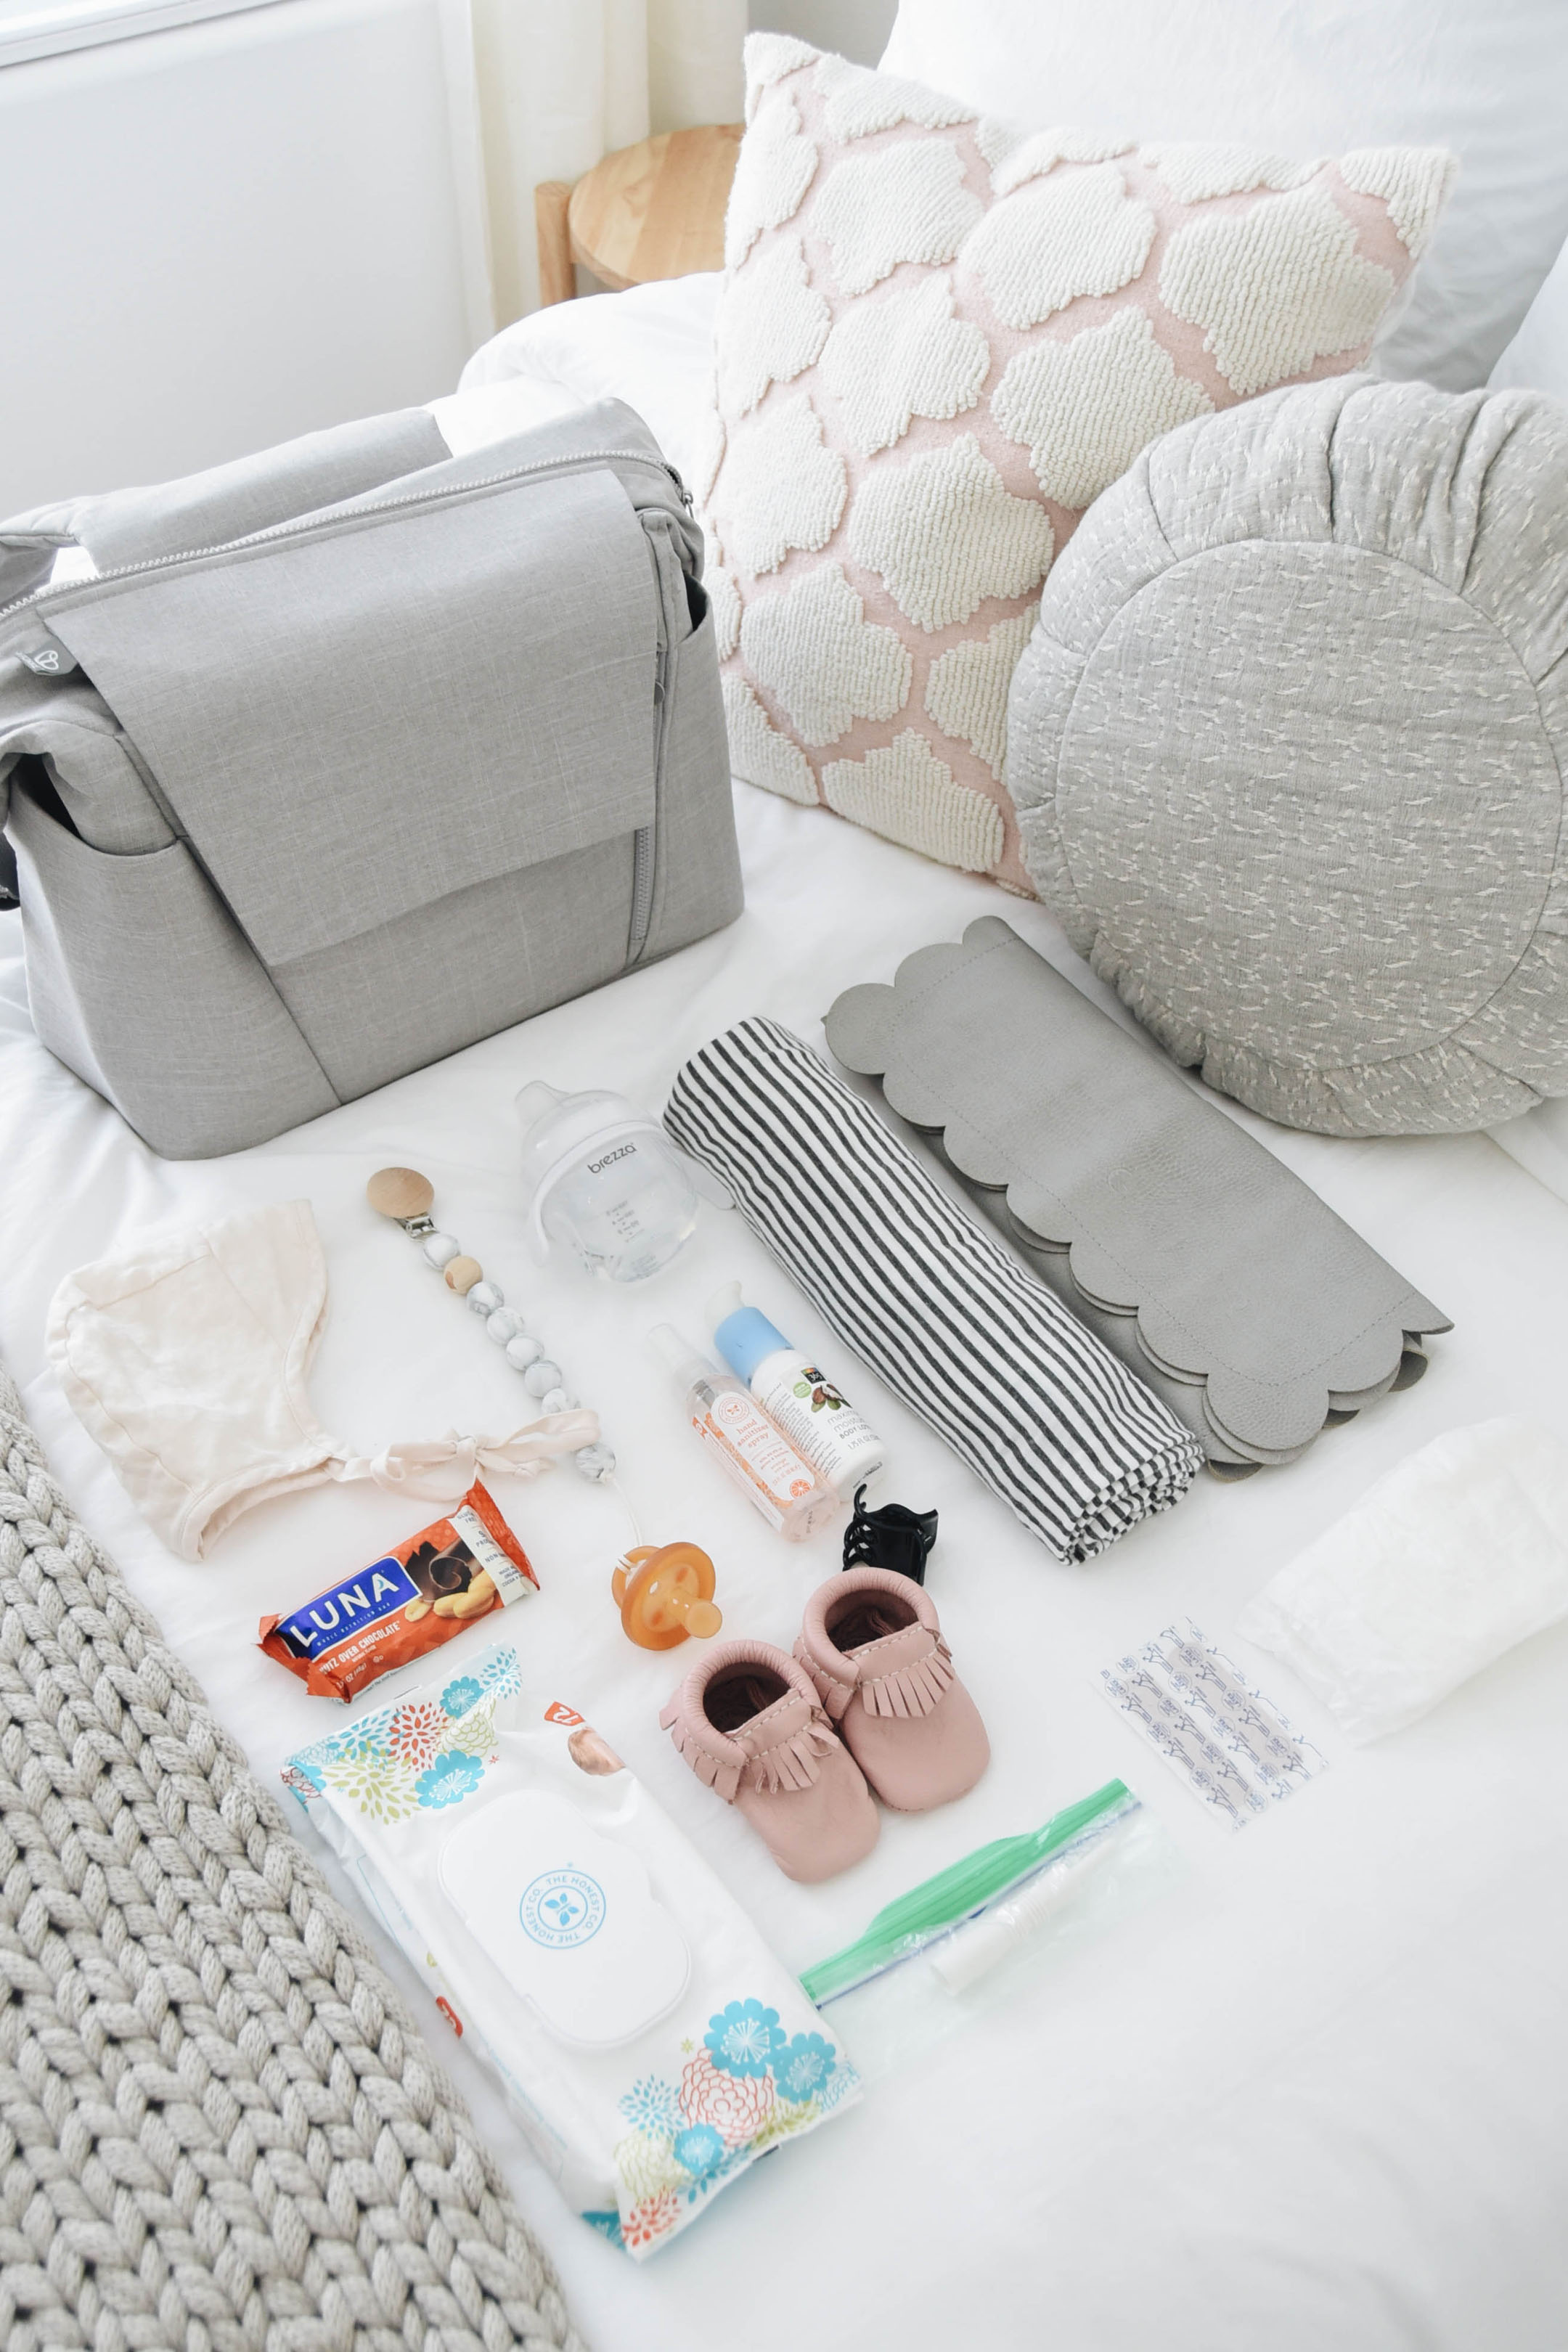 What to put in diaper bag